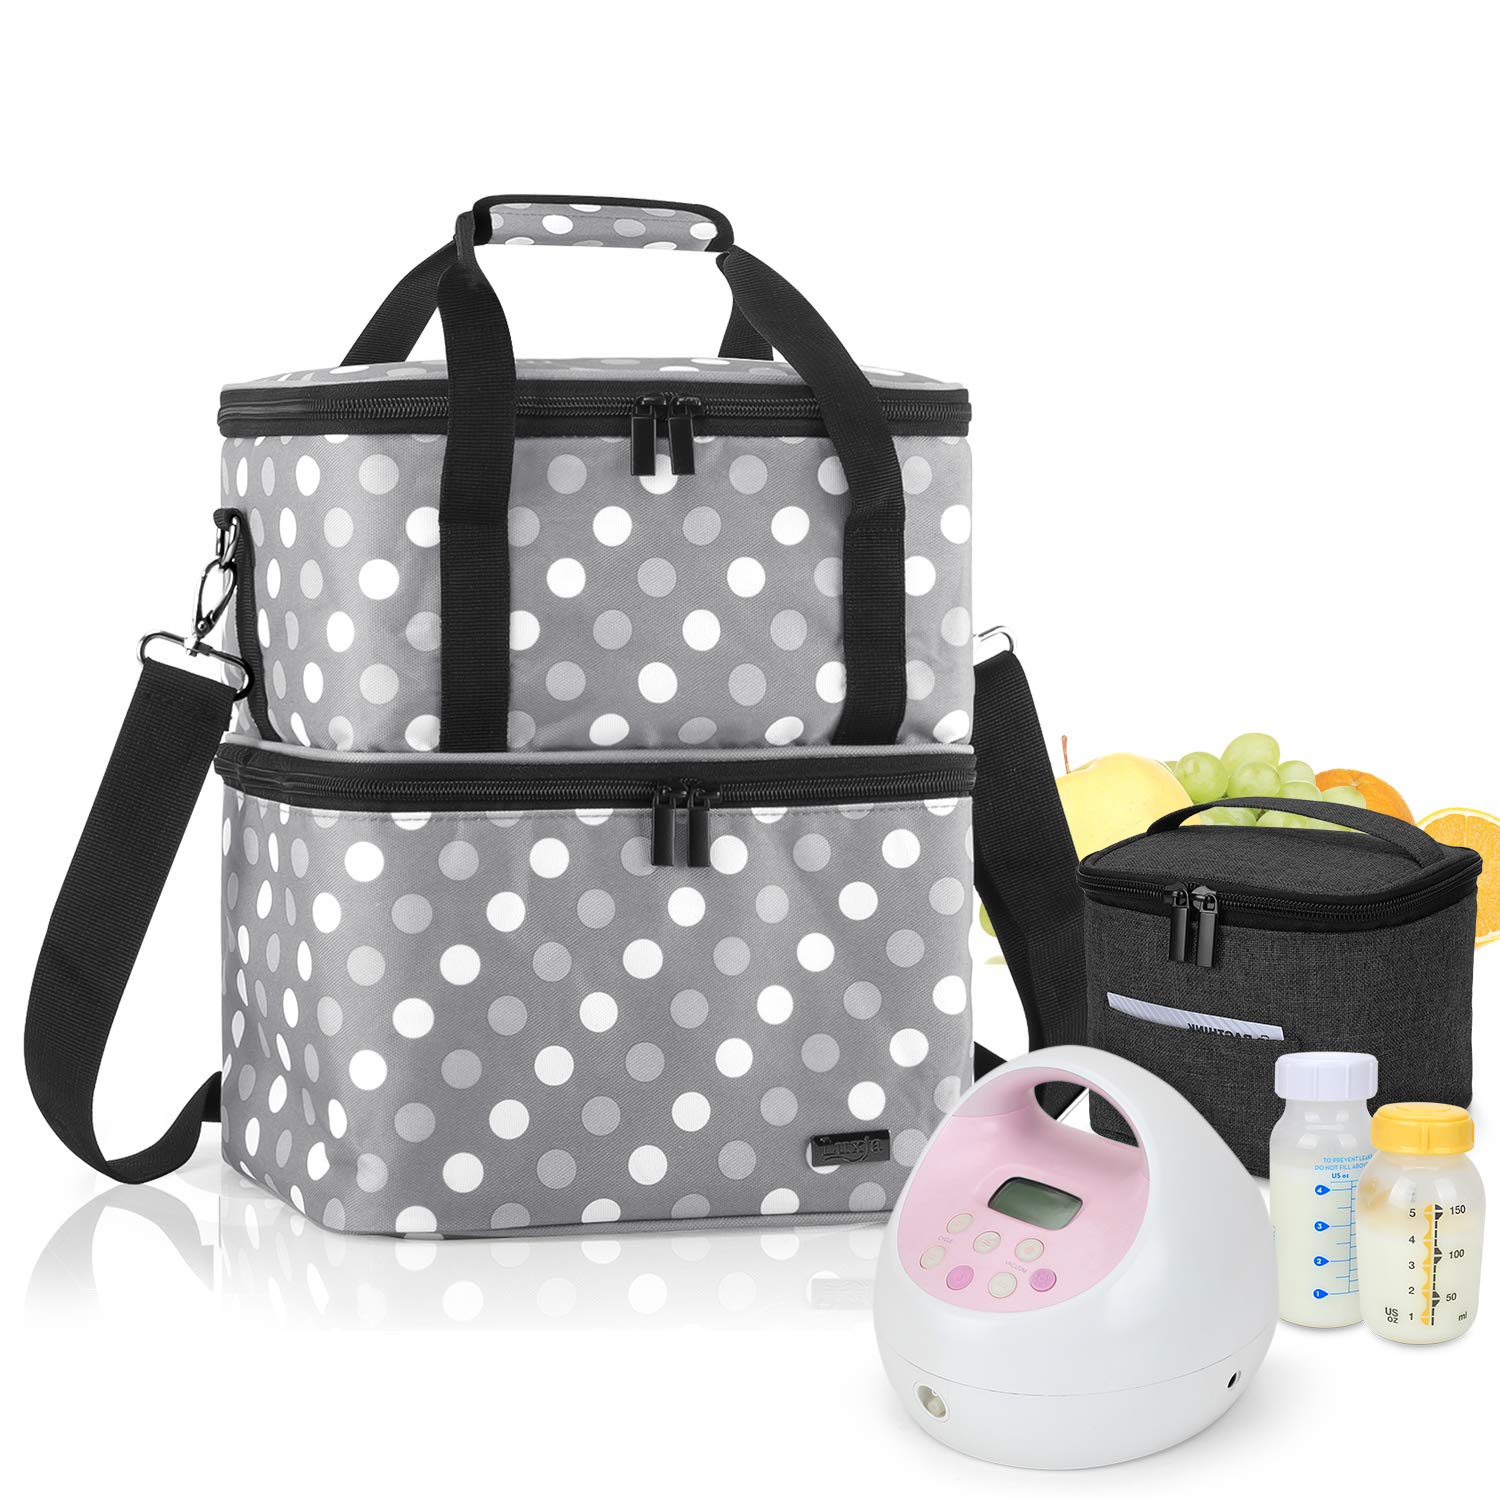 Luxja Breast Pump Bag with 2 Insulated Compartments for Breast Pump and Cooler Bag, Pumping Bag for Working Mothers (Fits Most Major Breast Pump), Gray Dots